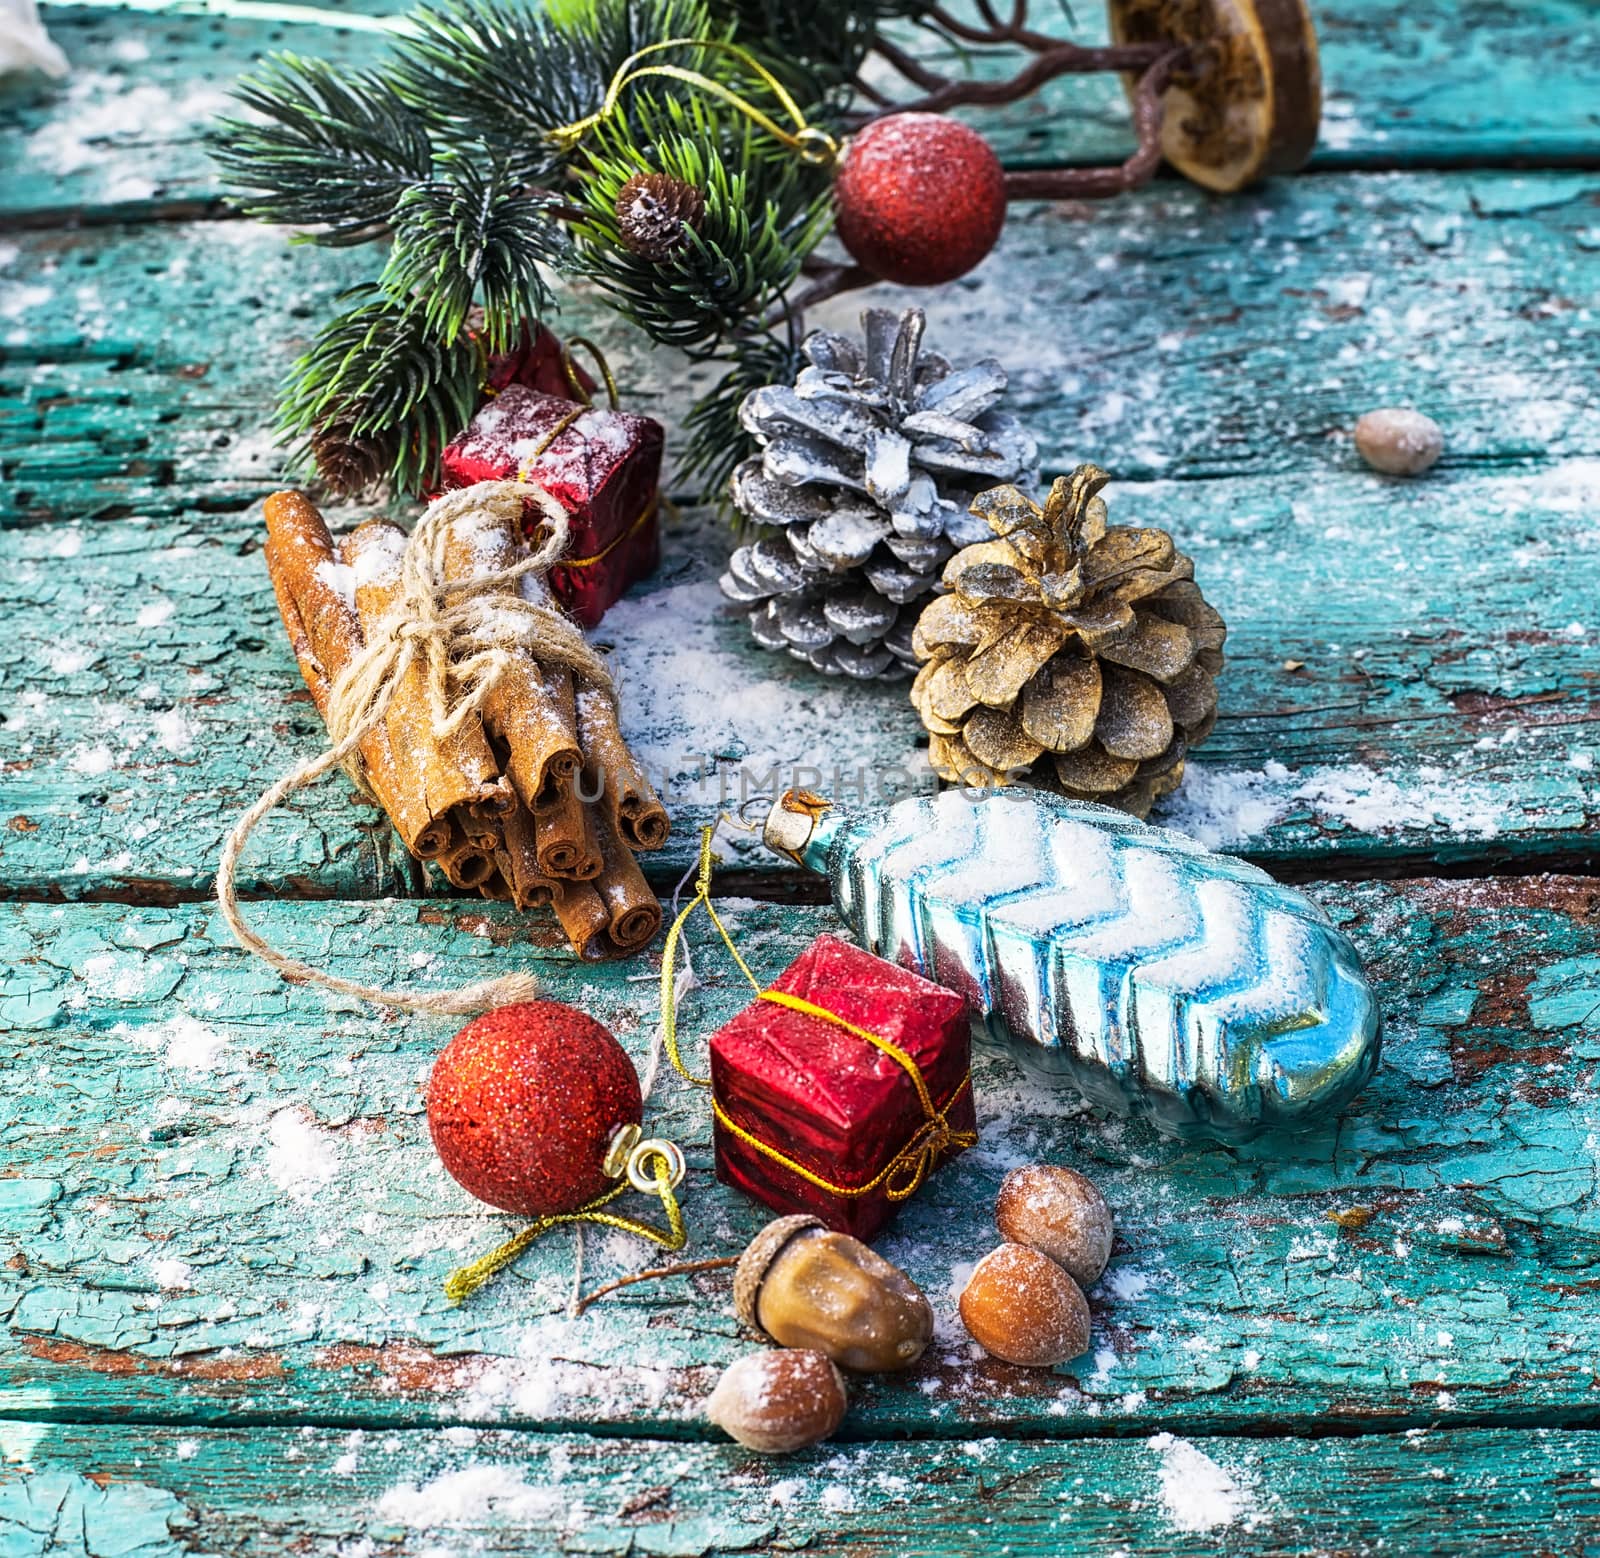 Gifts and decorations for Christmas on wooden background strewn with pine cones and spices